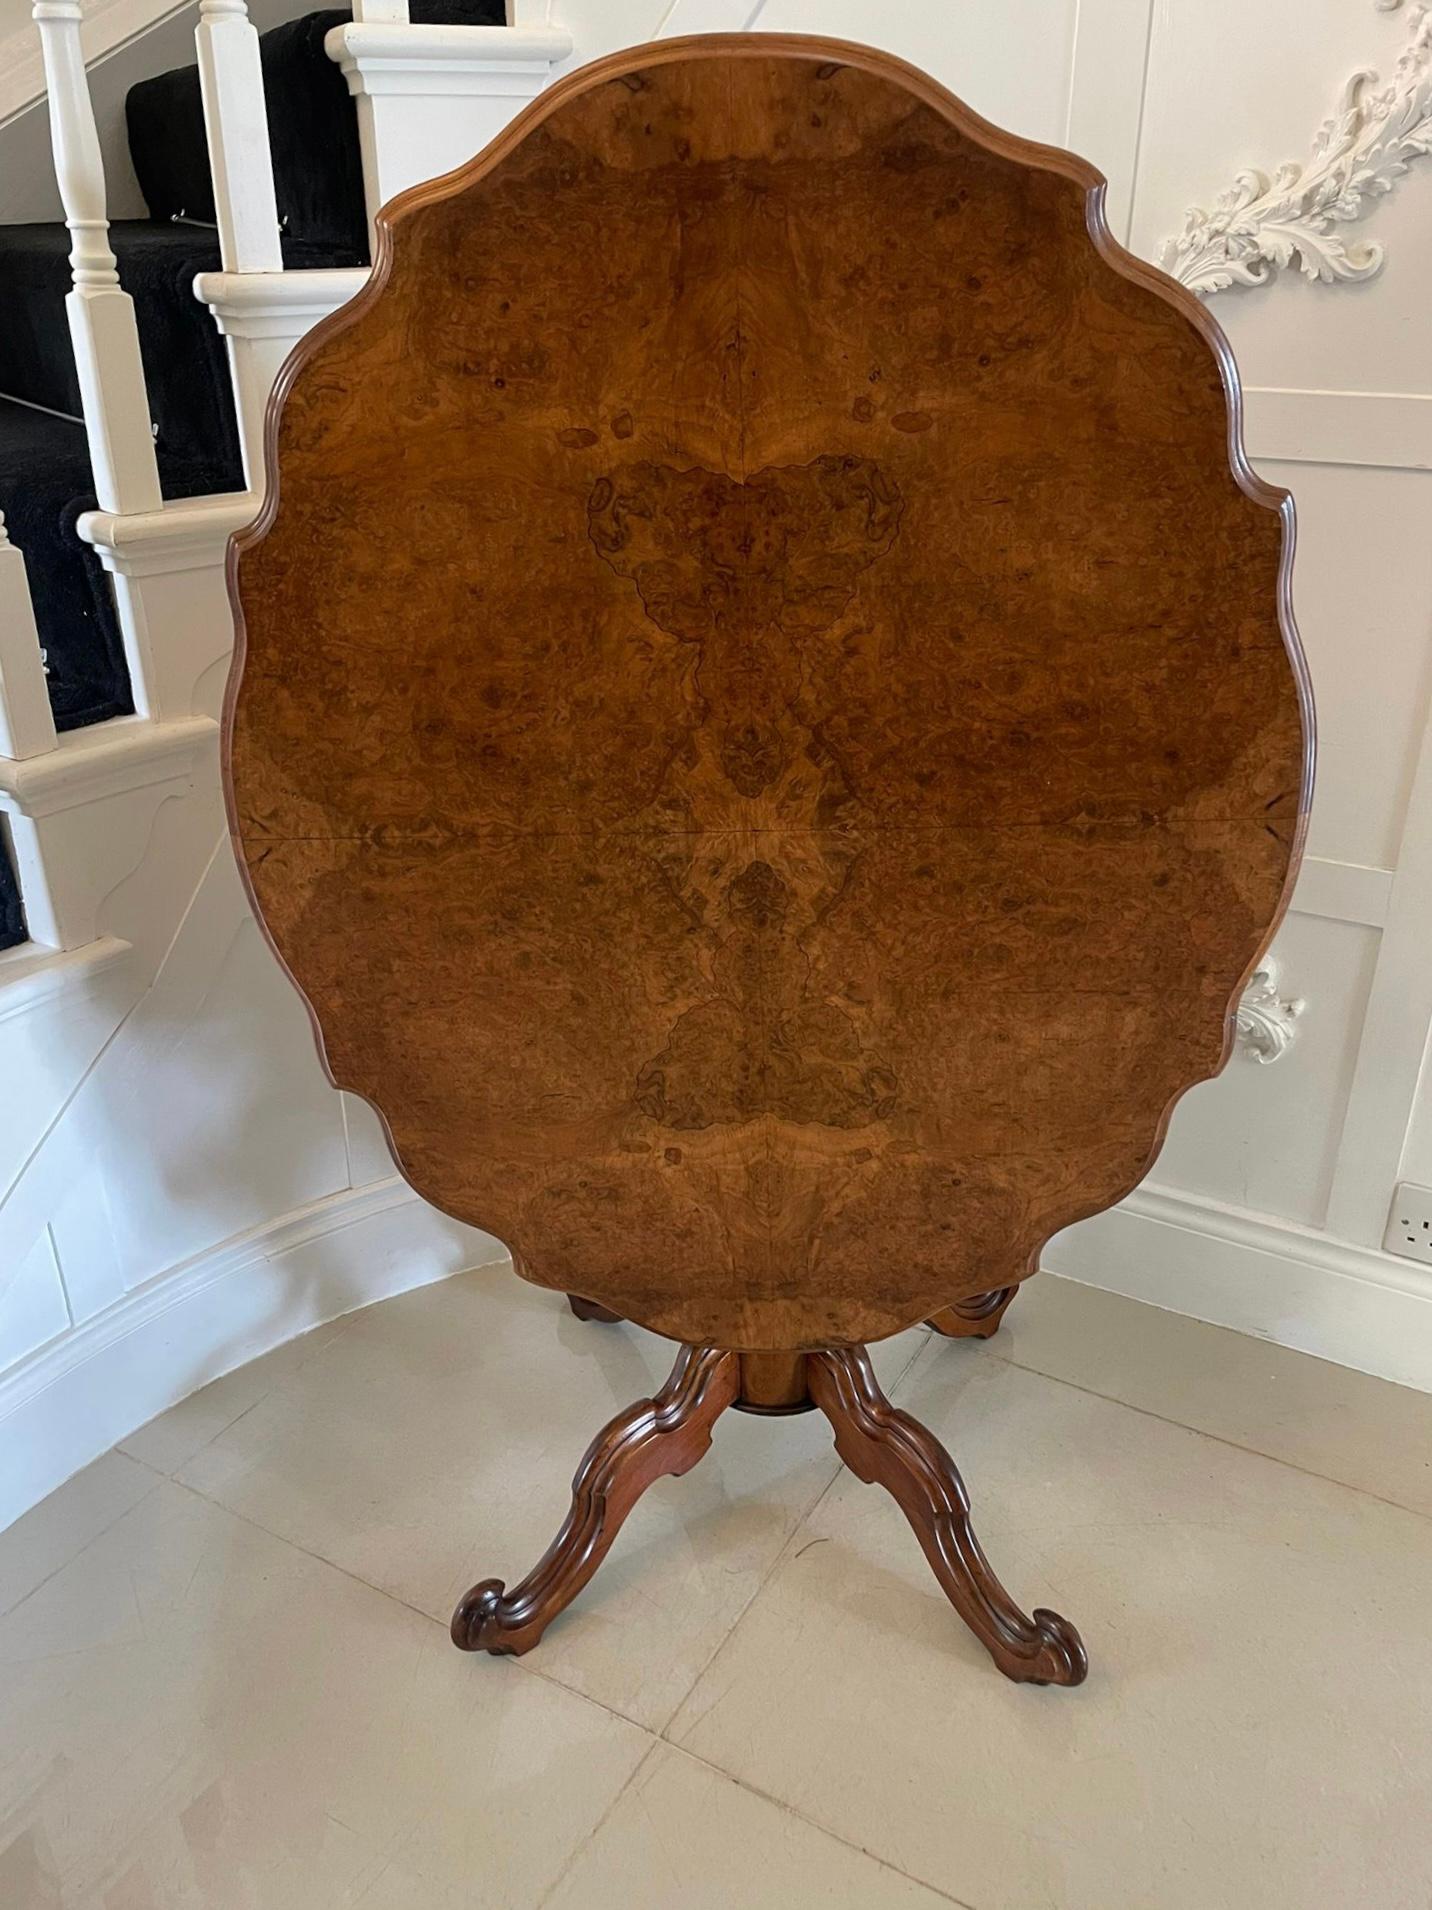 Fine quality antique burr walnut shaped tilt top centre table. The tilt top having fantastic matched burr walnut veneers with a thumb moulded edge and an attractive and unusual solid walnut base with a shaped reeded centre column supported by four